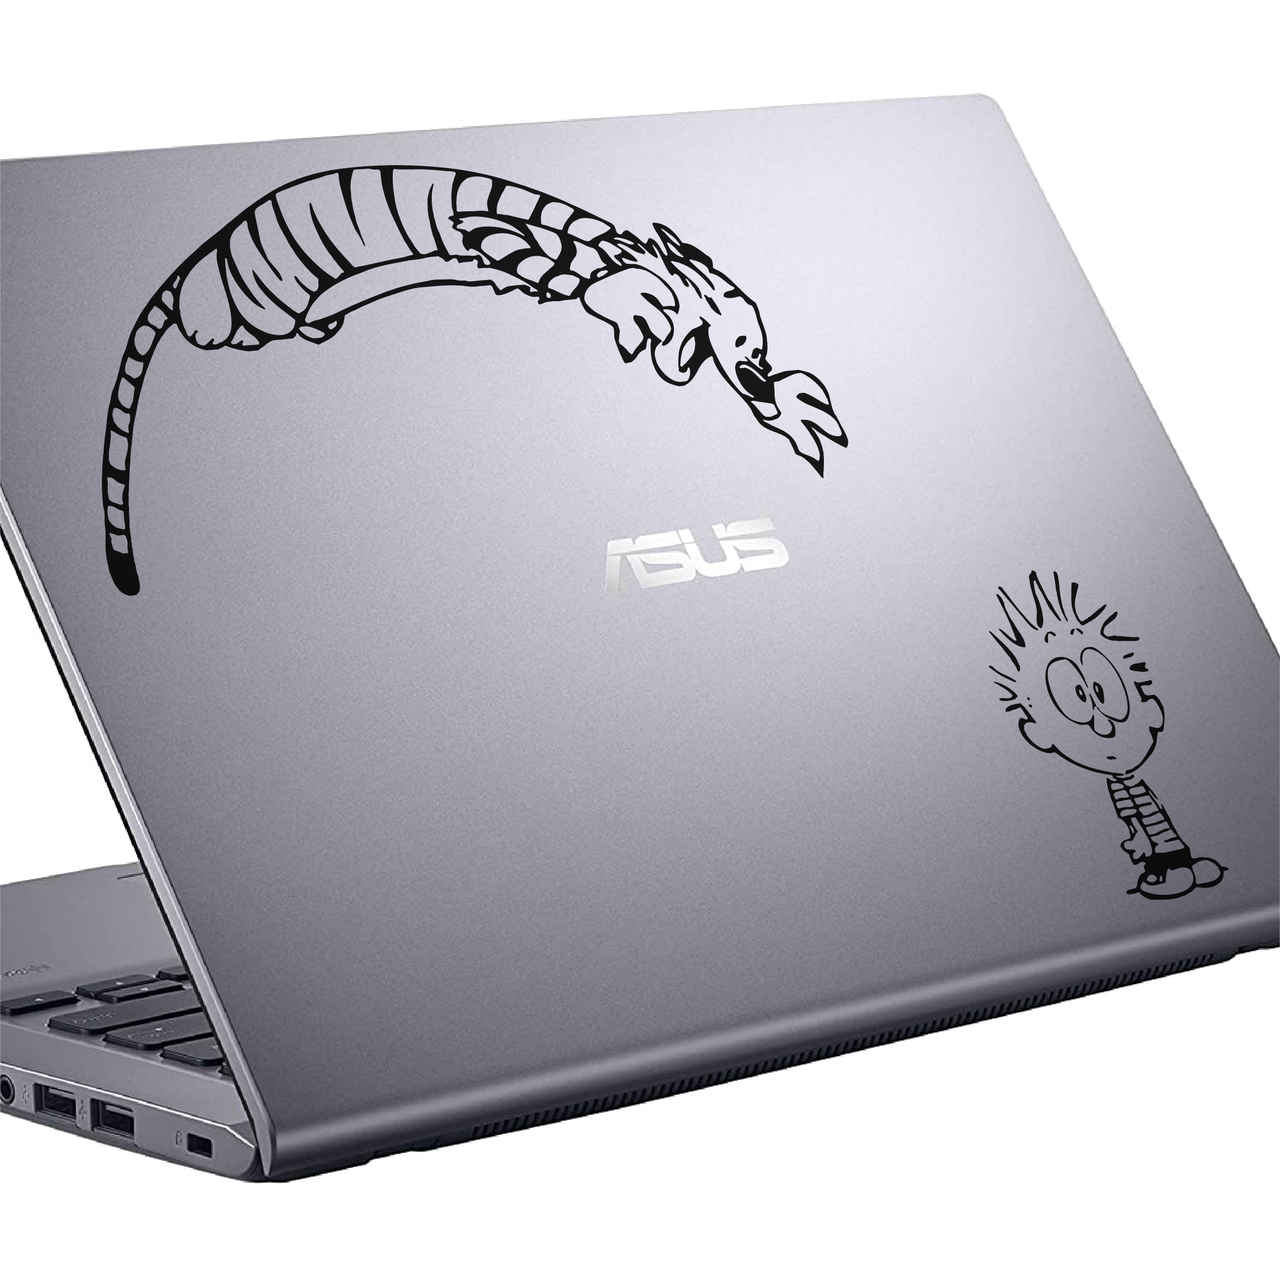 Calvin and Hobbes Laptop Decal (Type 2)